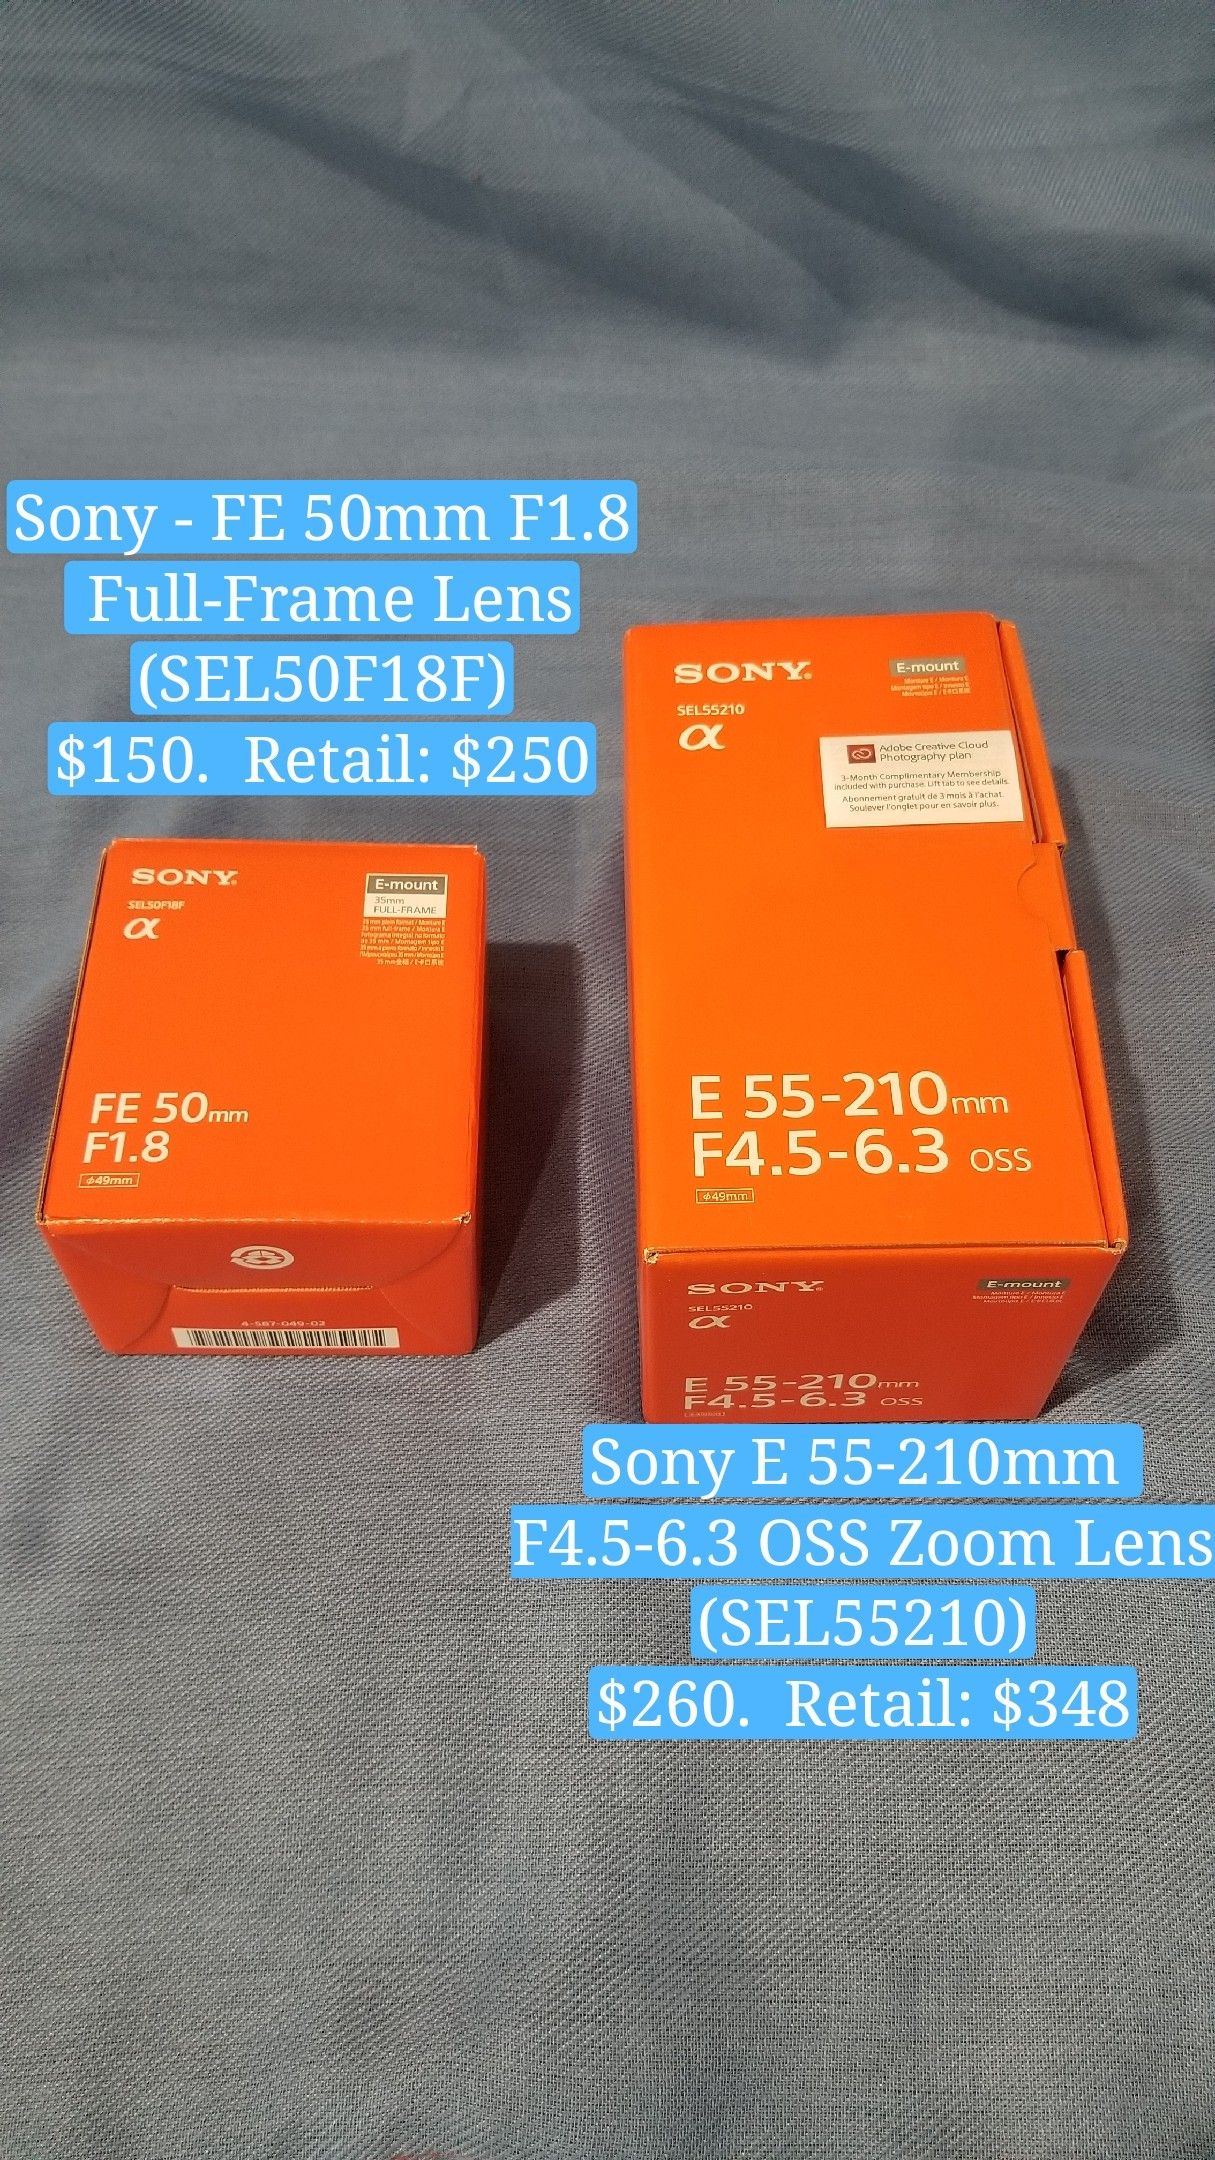 Brand new Sony E-Mount lens for sale, FE50mm $150 (SOLD) and E55-210mm $260